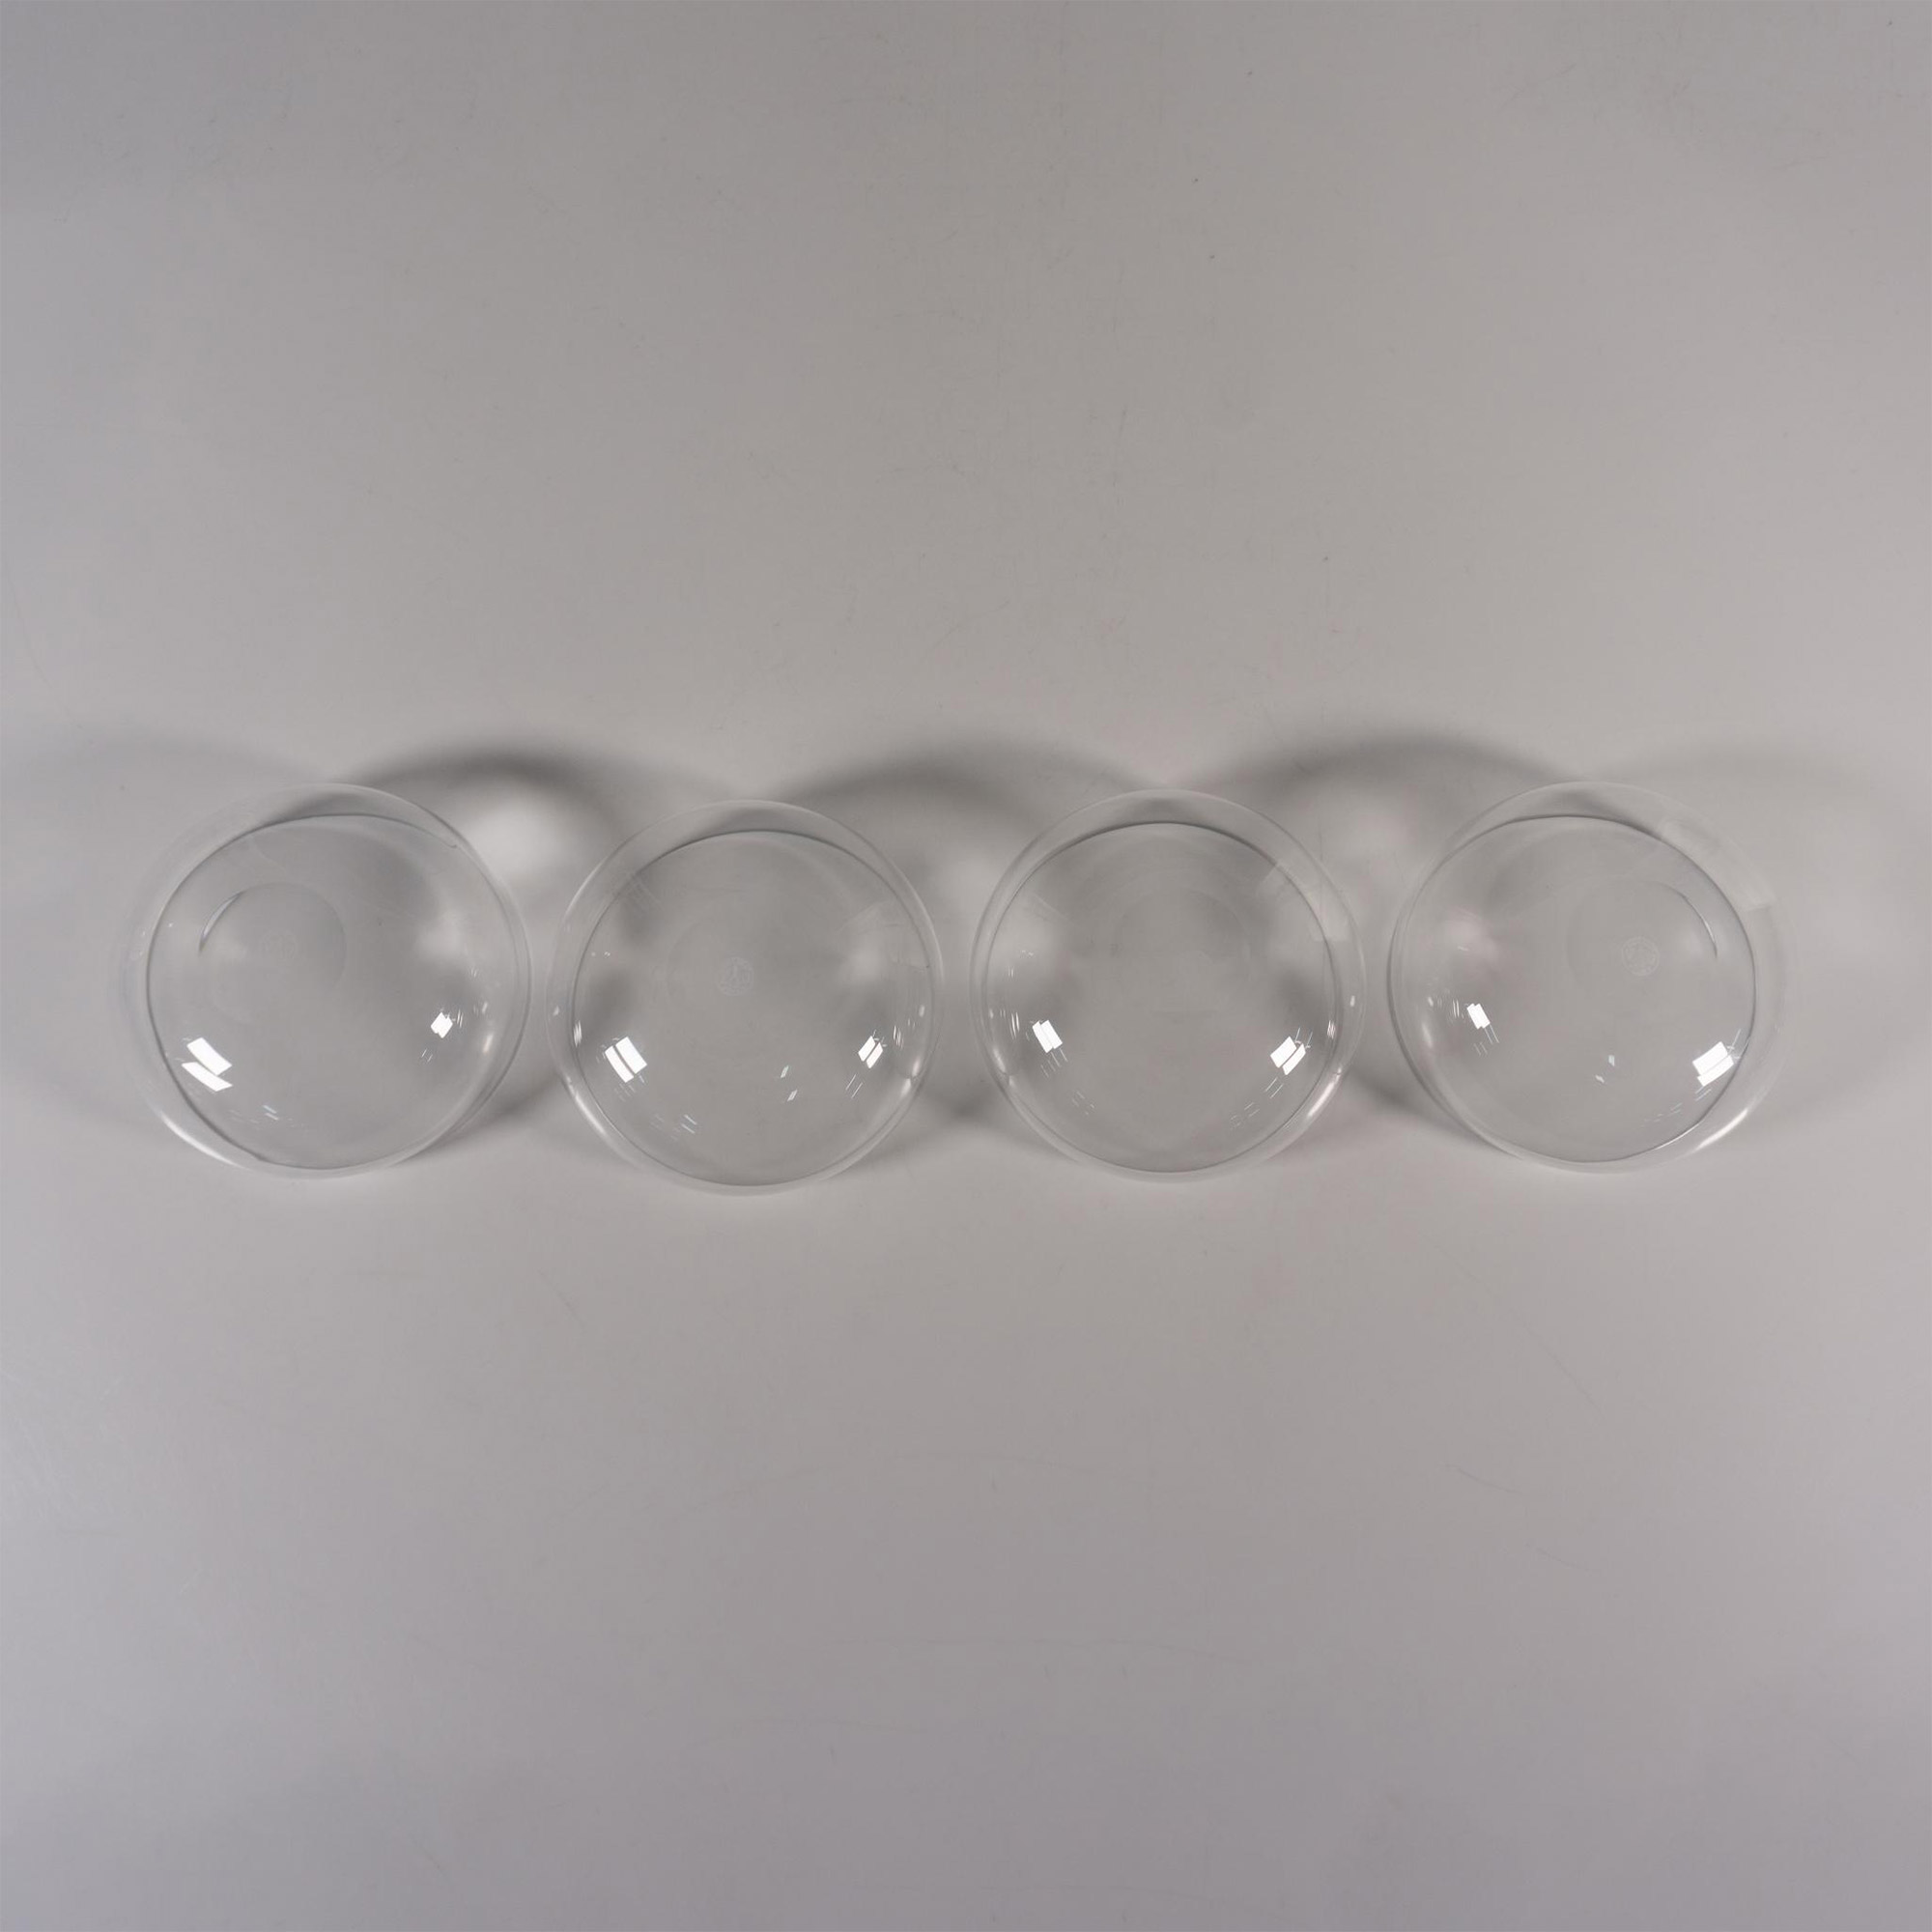 4pc Baccarat Crystal Finger Bowl, Perfection Pattern - Image 2 of 2